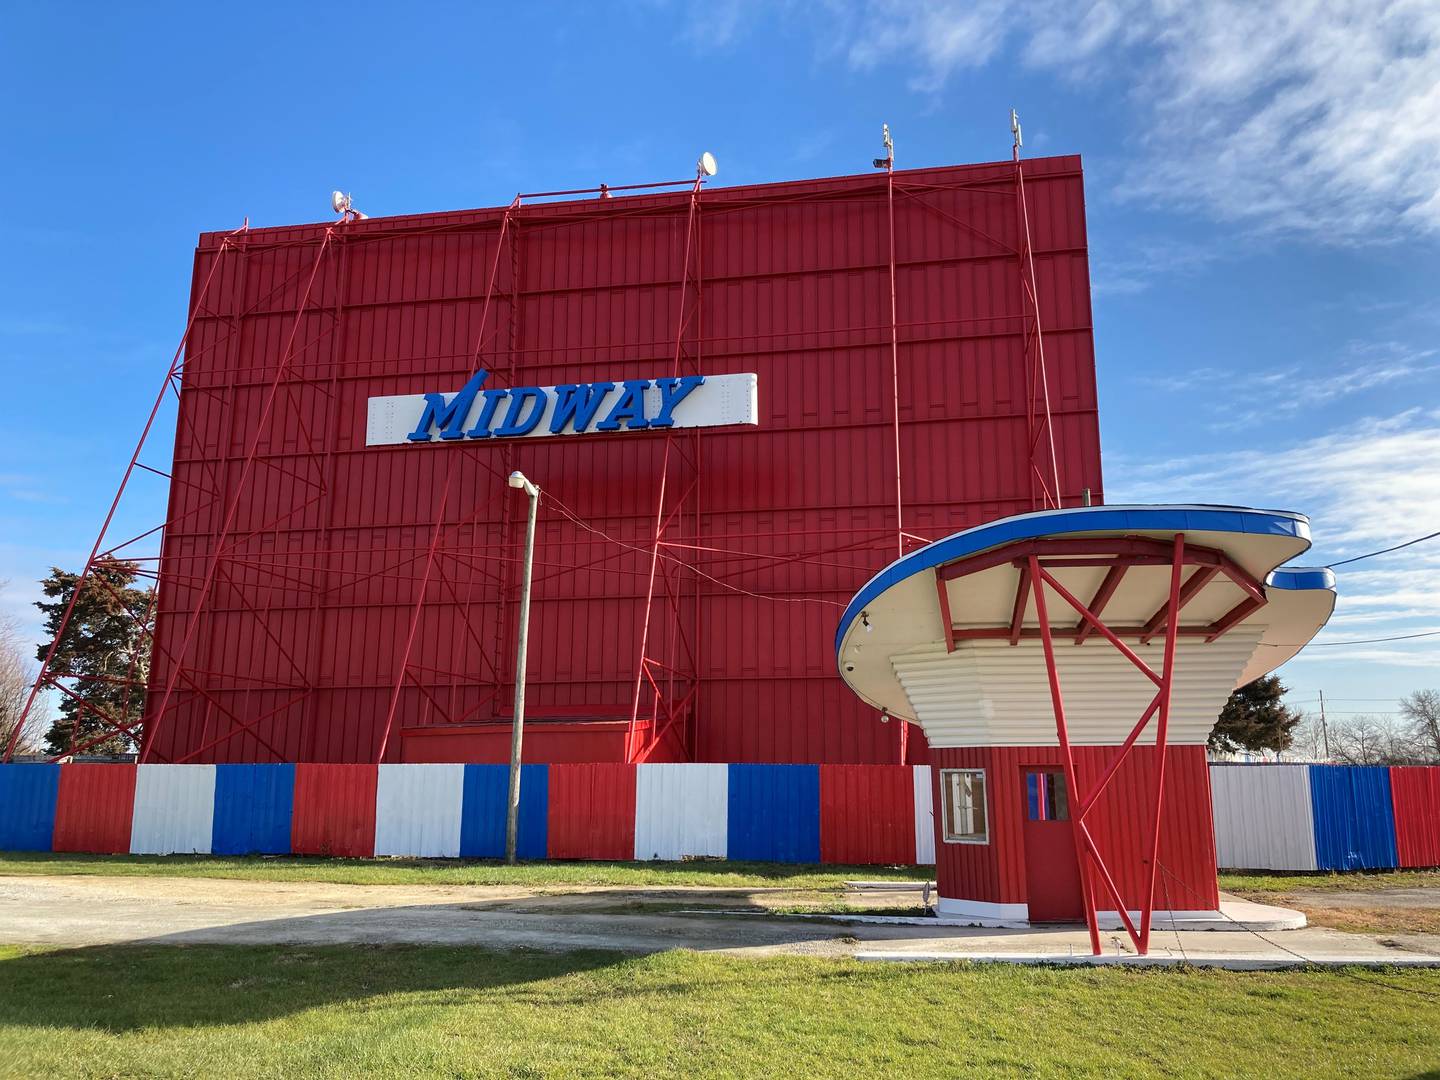 The Midway Drive-In at 91 Palmyra Rd. in Sterling, IL.